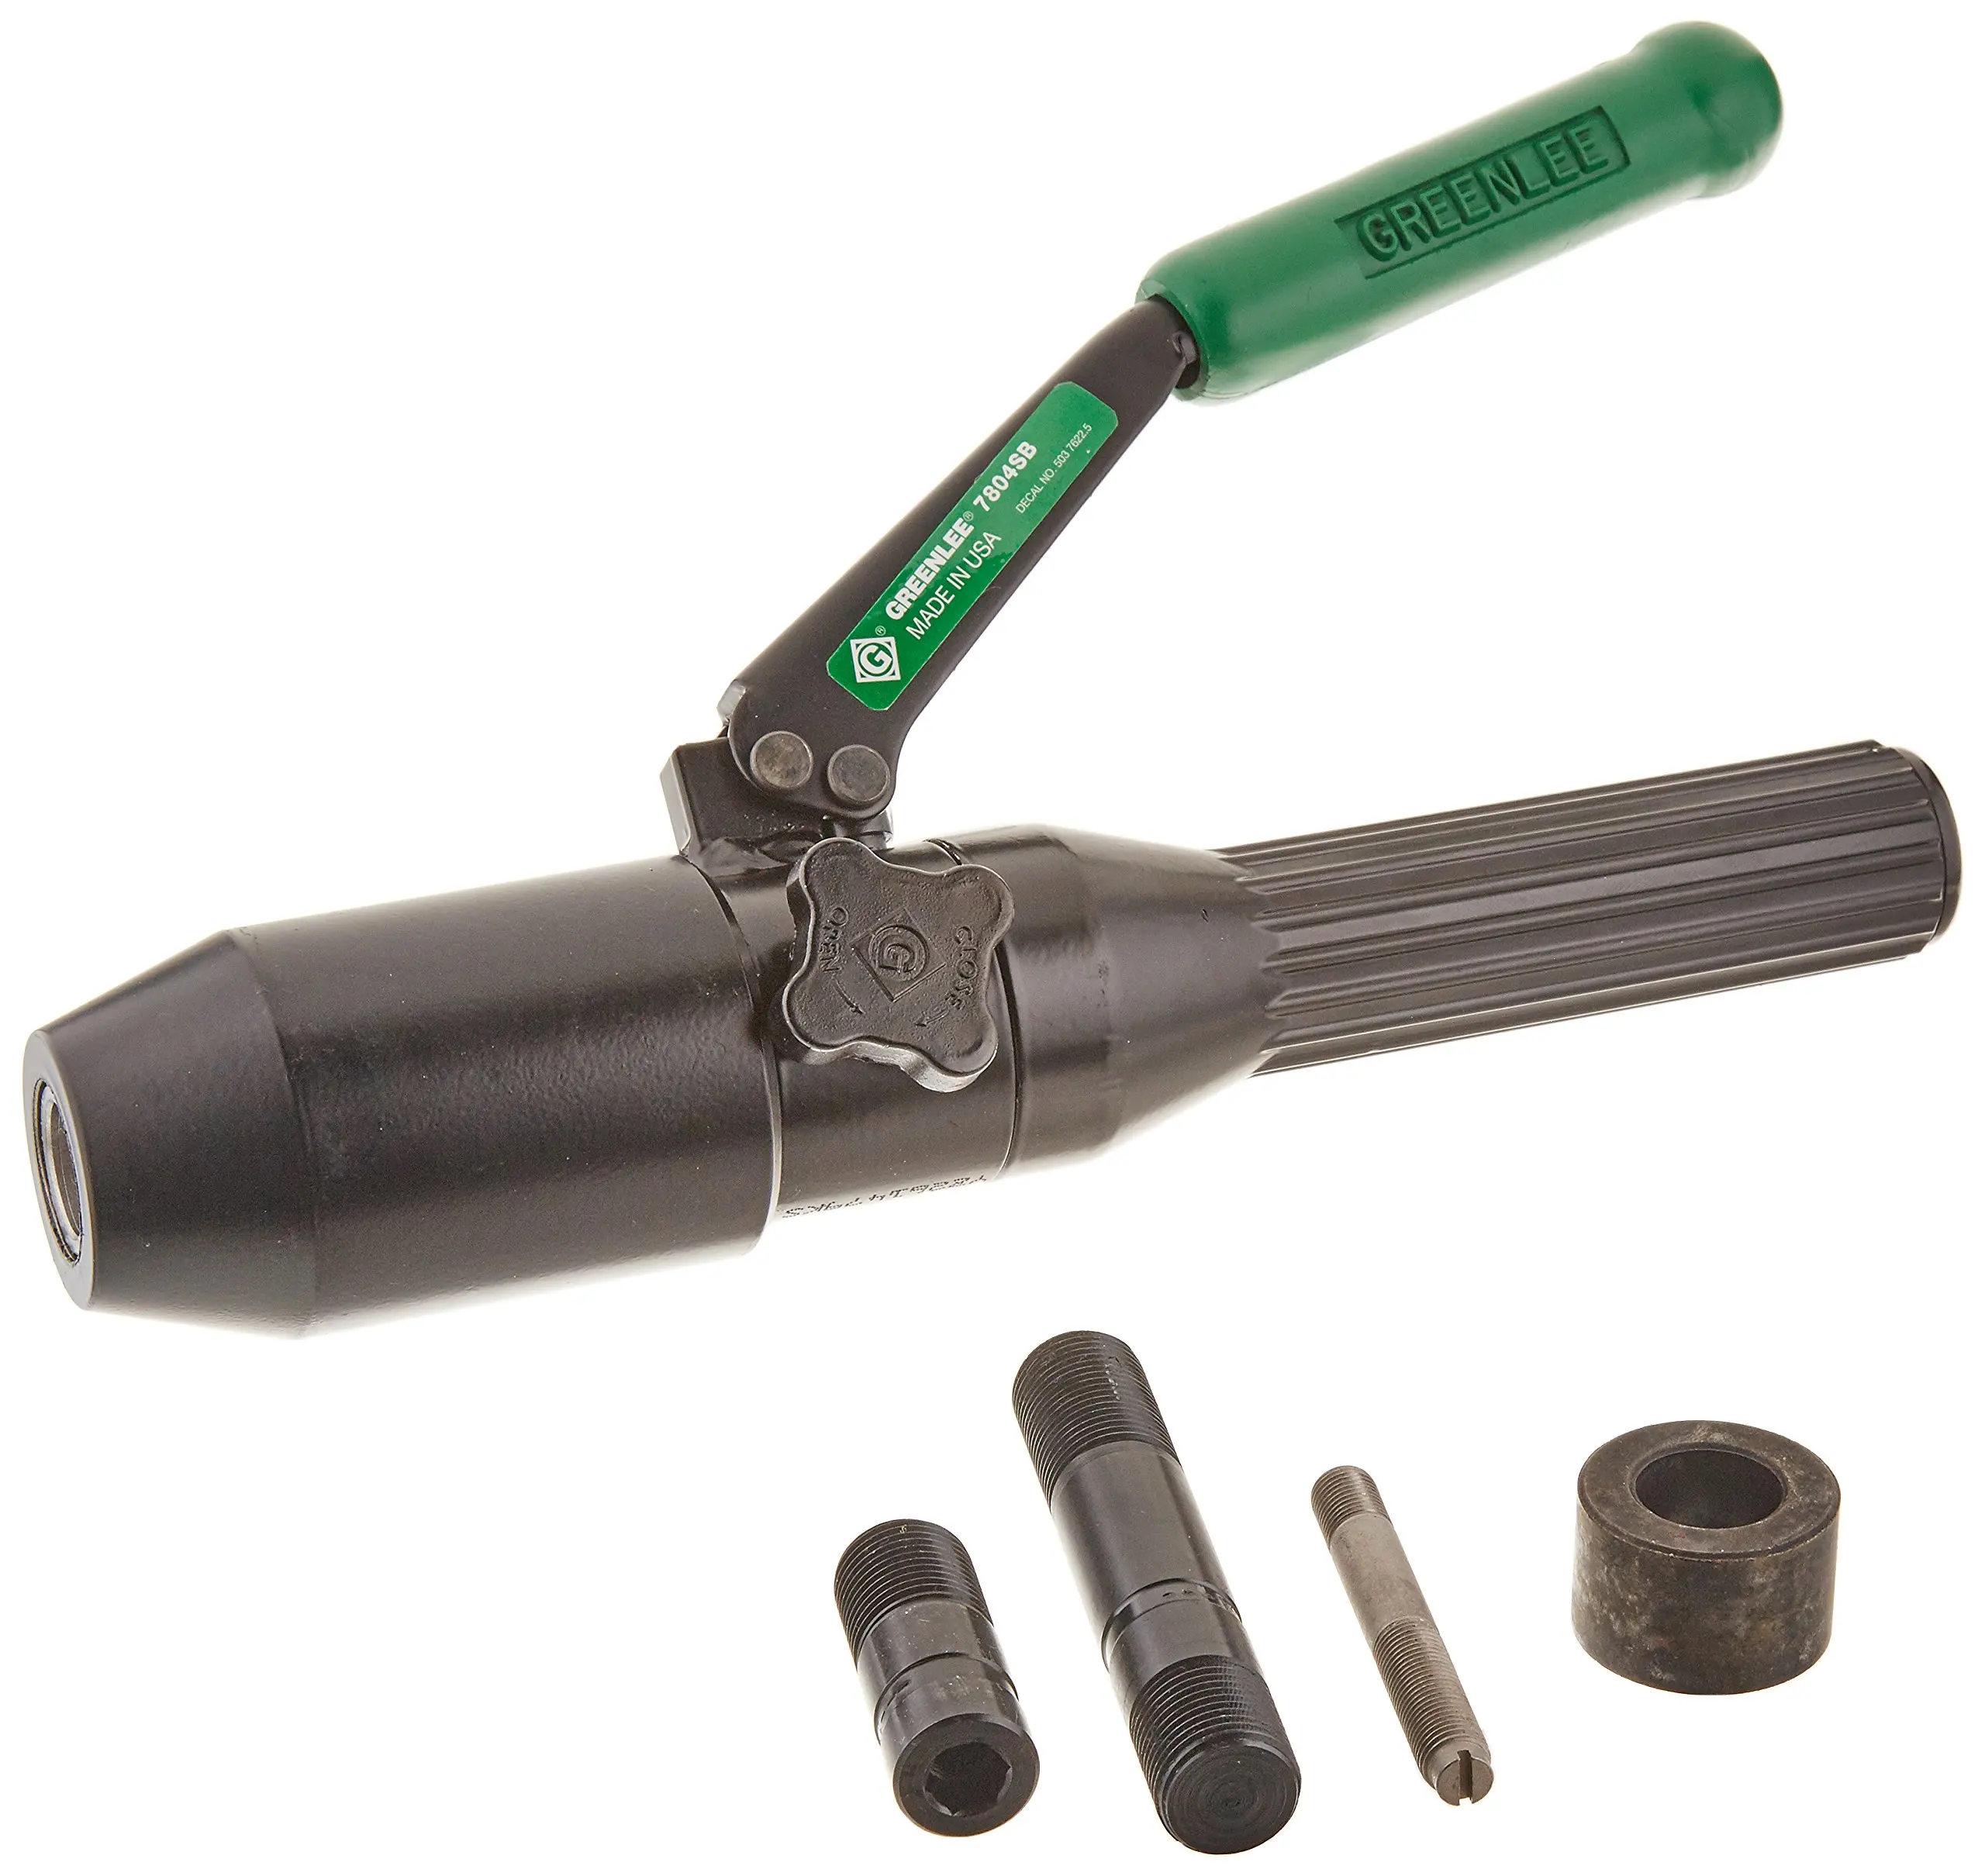 Buy Greenlee 7806-SB Quick Draw Hydraulic Punch Driver and Kit with